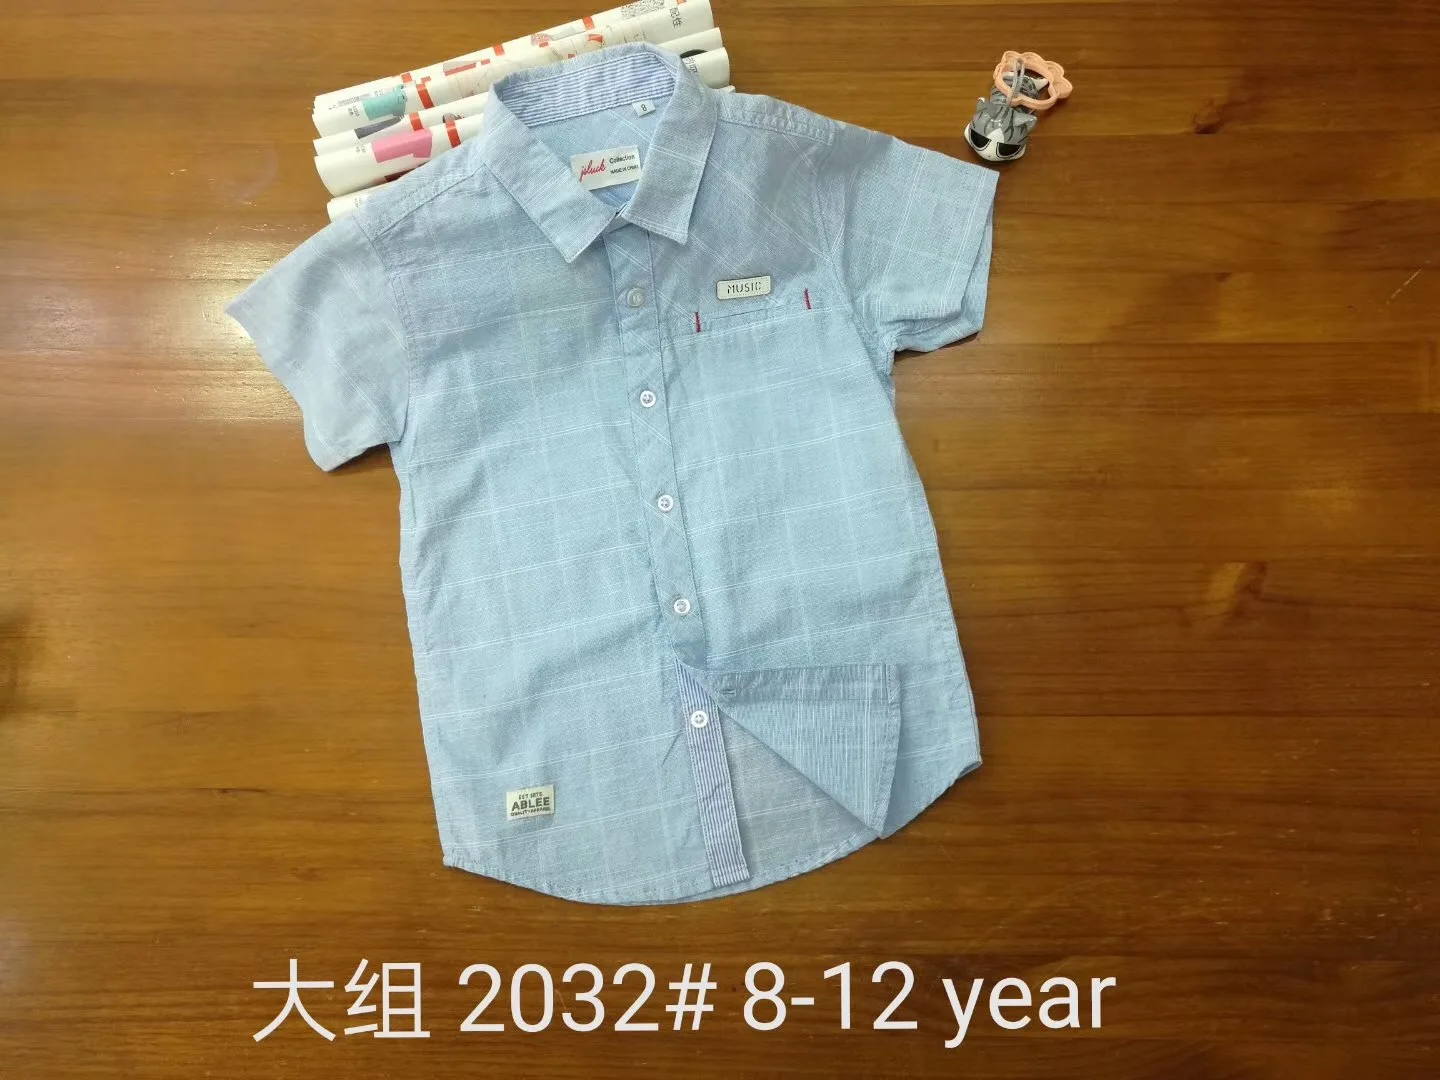 Wholesale Price Fashion Boys Clothing Kids Short Sleeves Polo T-shirt Baby Boys  Blouses For 8-12 Years Old - Buy Blouse Designs For Kids,Long Sleeve Body  Blouse,Fancy Polo T-shirts Product on Alibaba.com